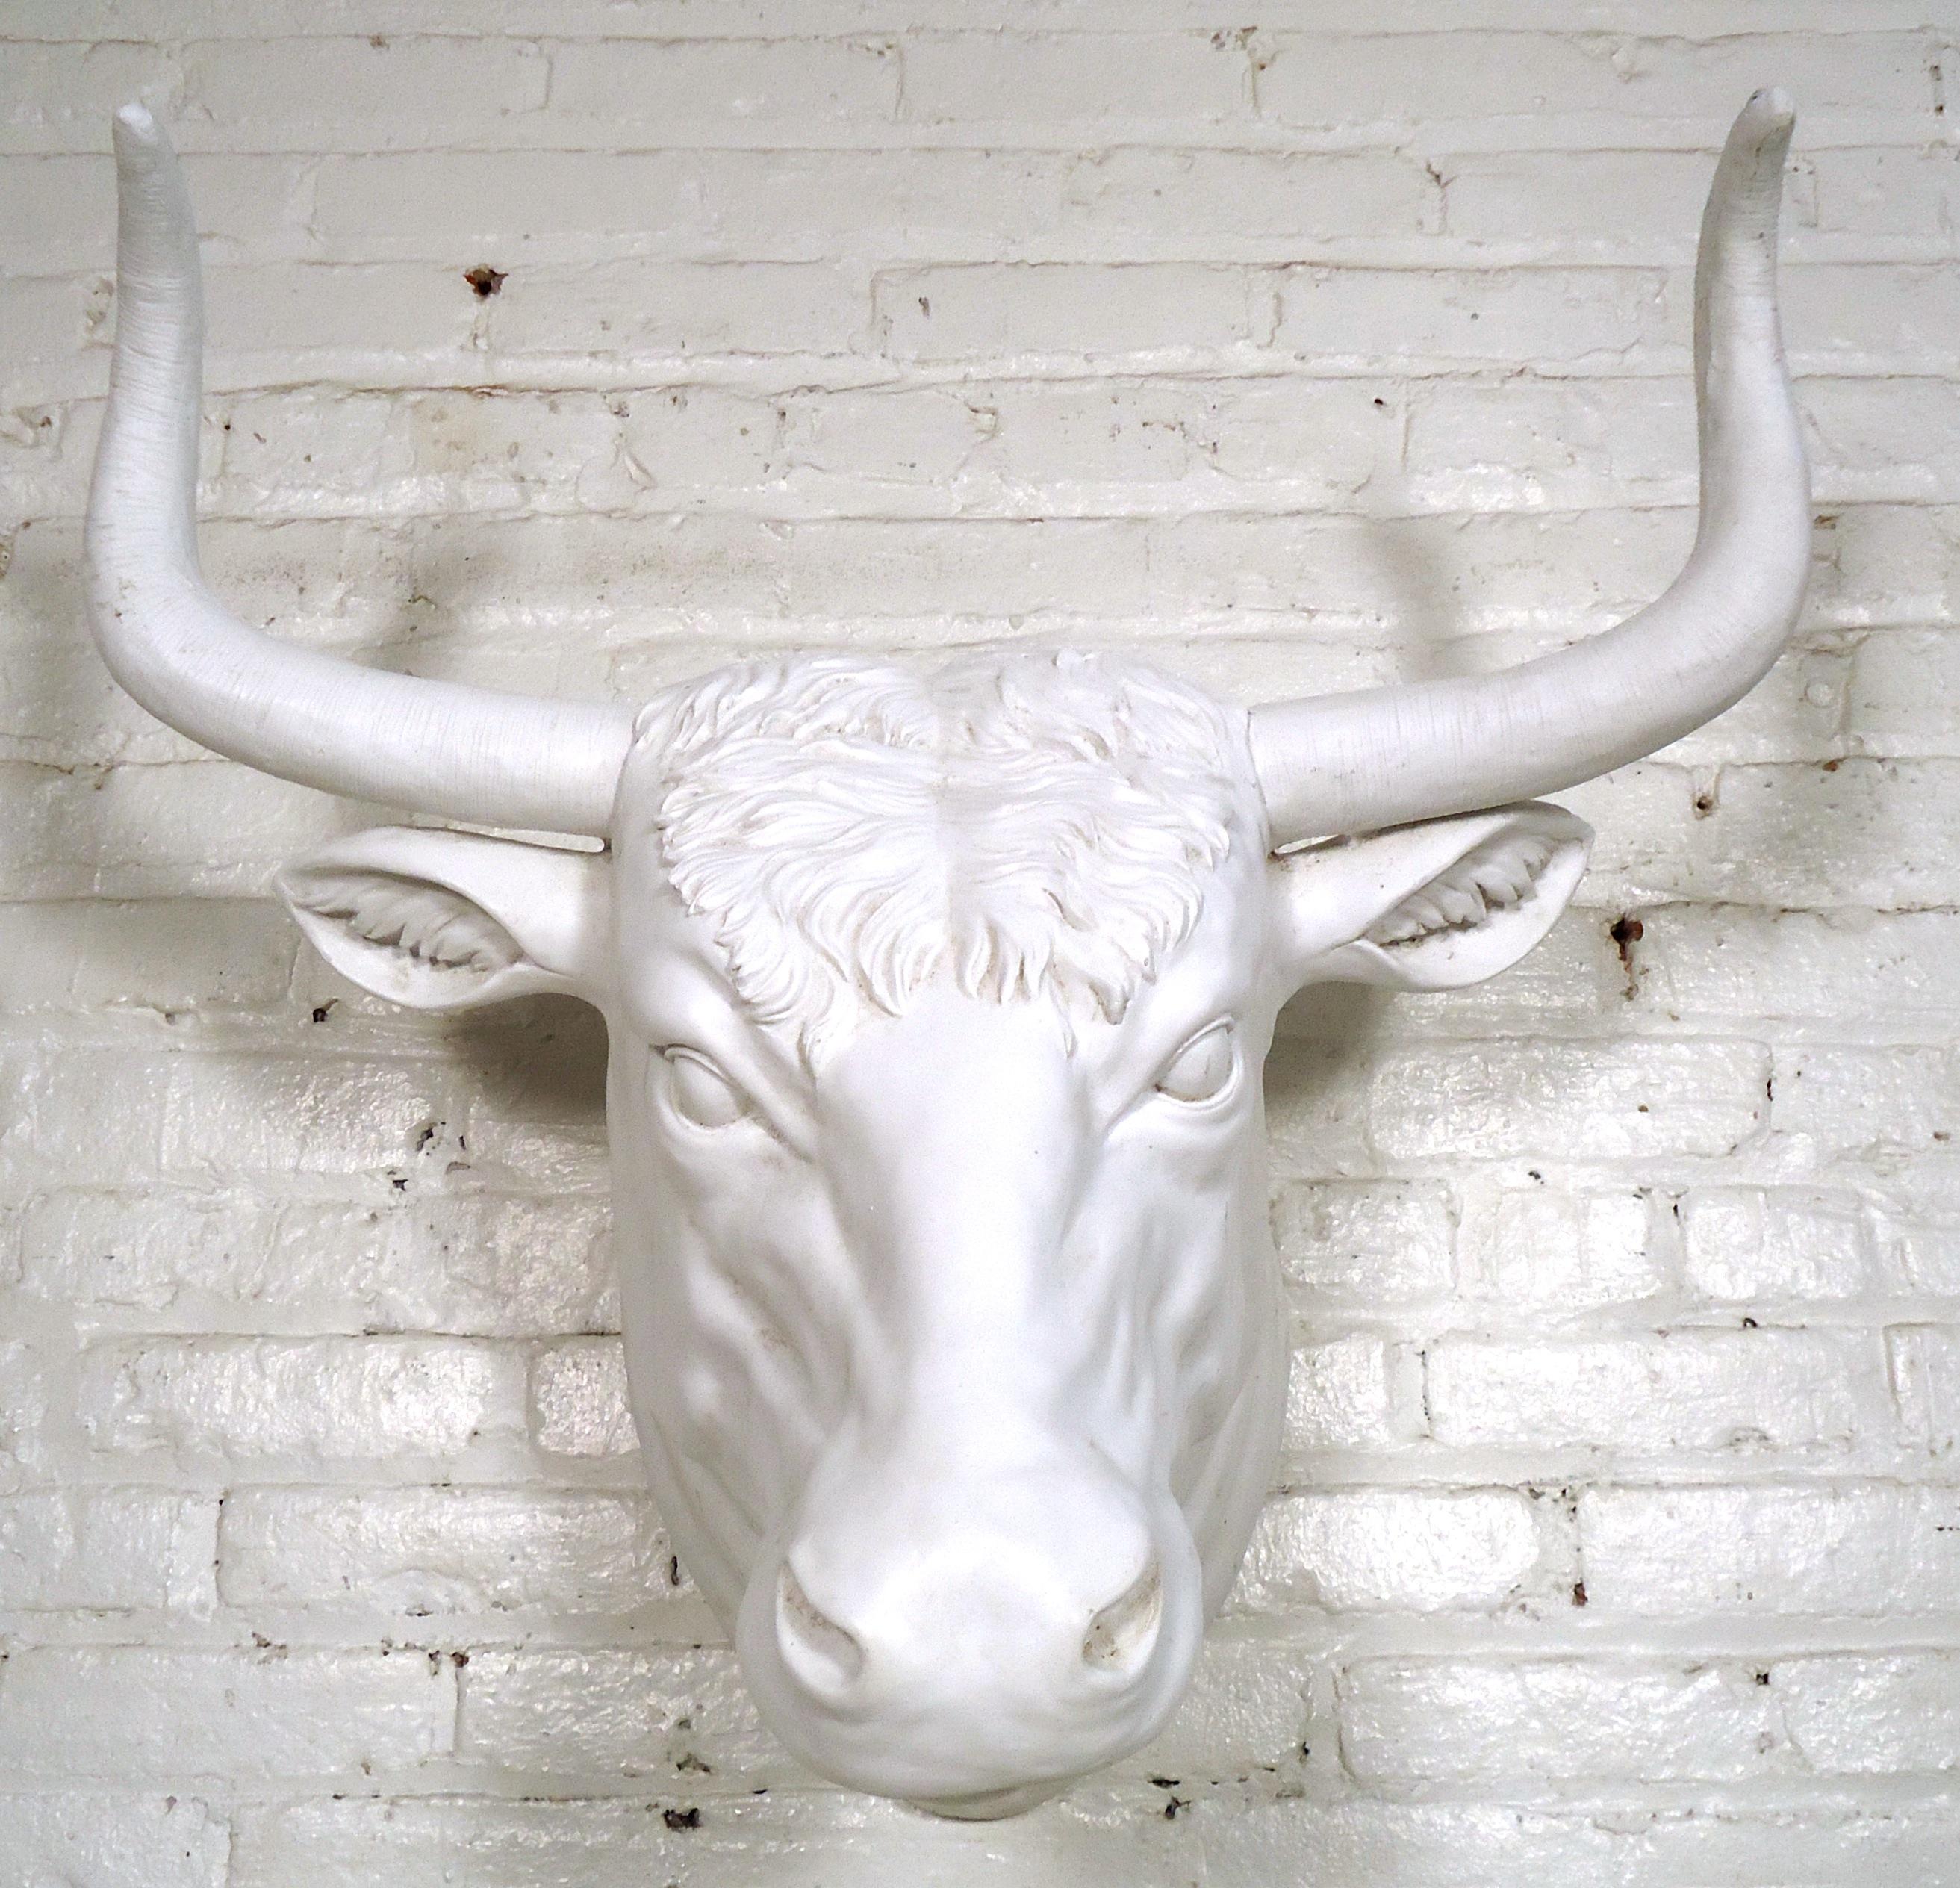 Vintage style hanging bull head featured in white fiberglass. This wall art would make a great addition to any home.
Please confirm item location NY or NJ with dealer.